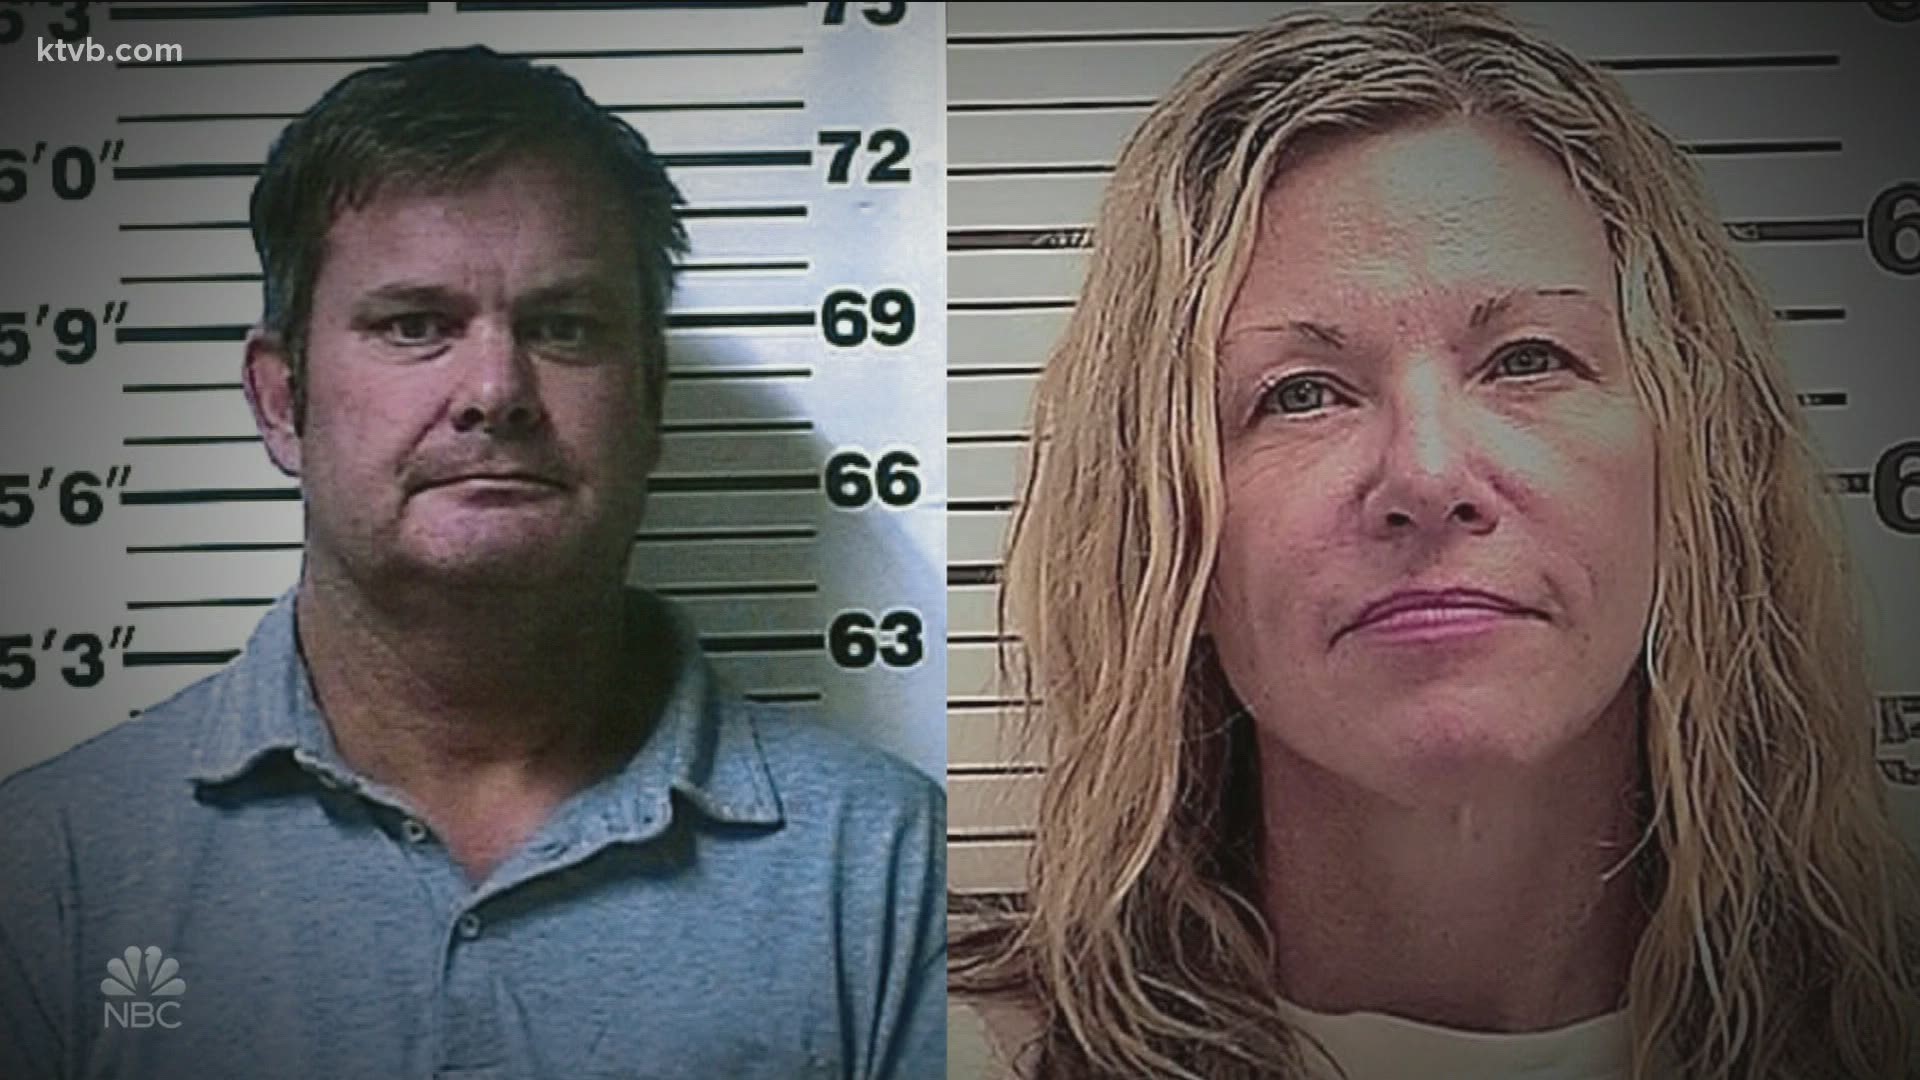 Investigators are seeking the charge in connection to the death of her late husband Charles Vallow, who was shot to death in July 2019.